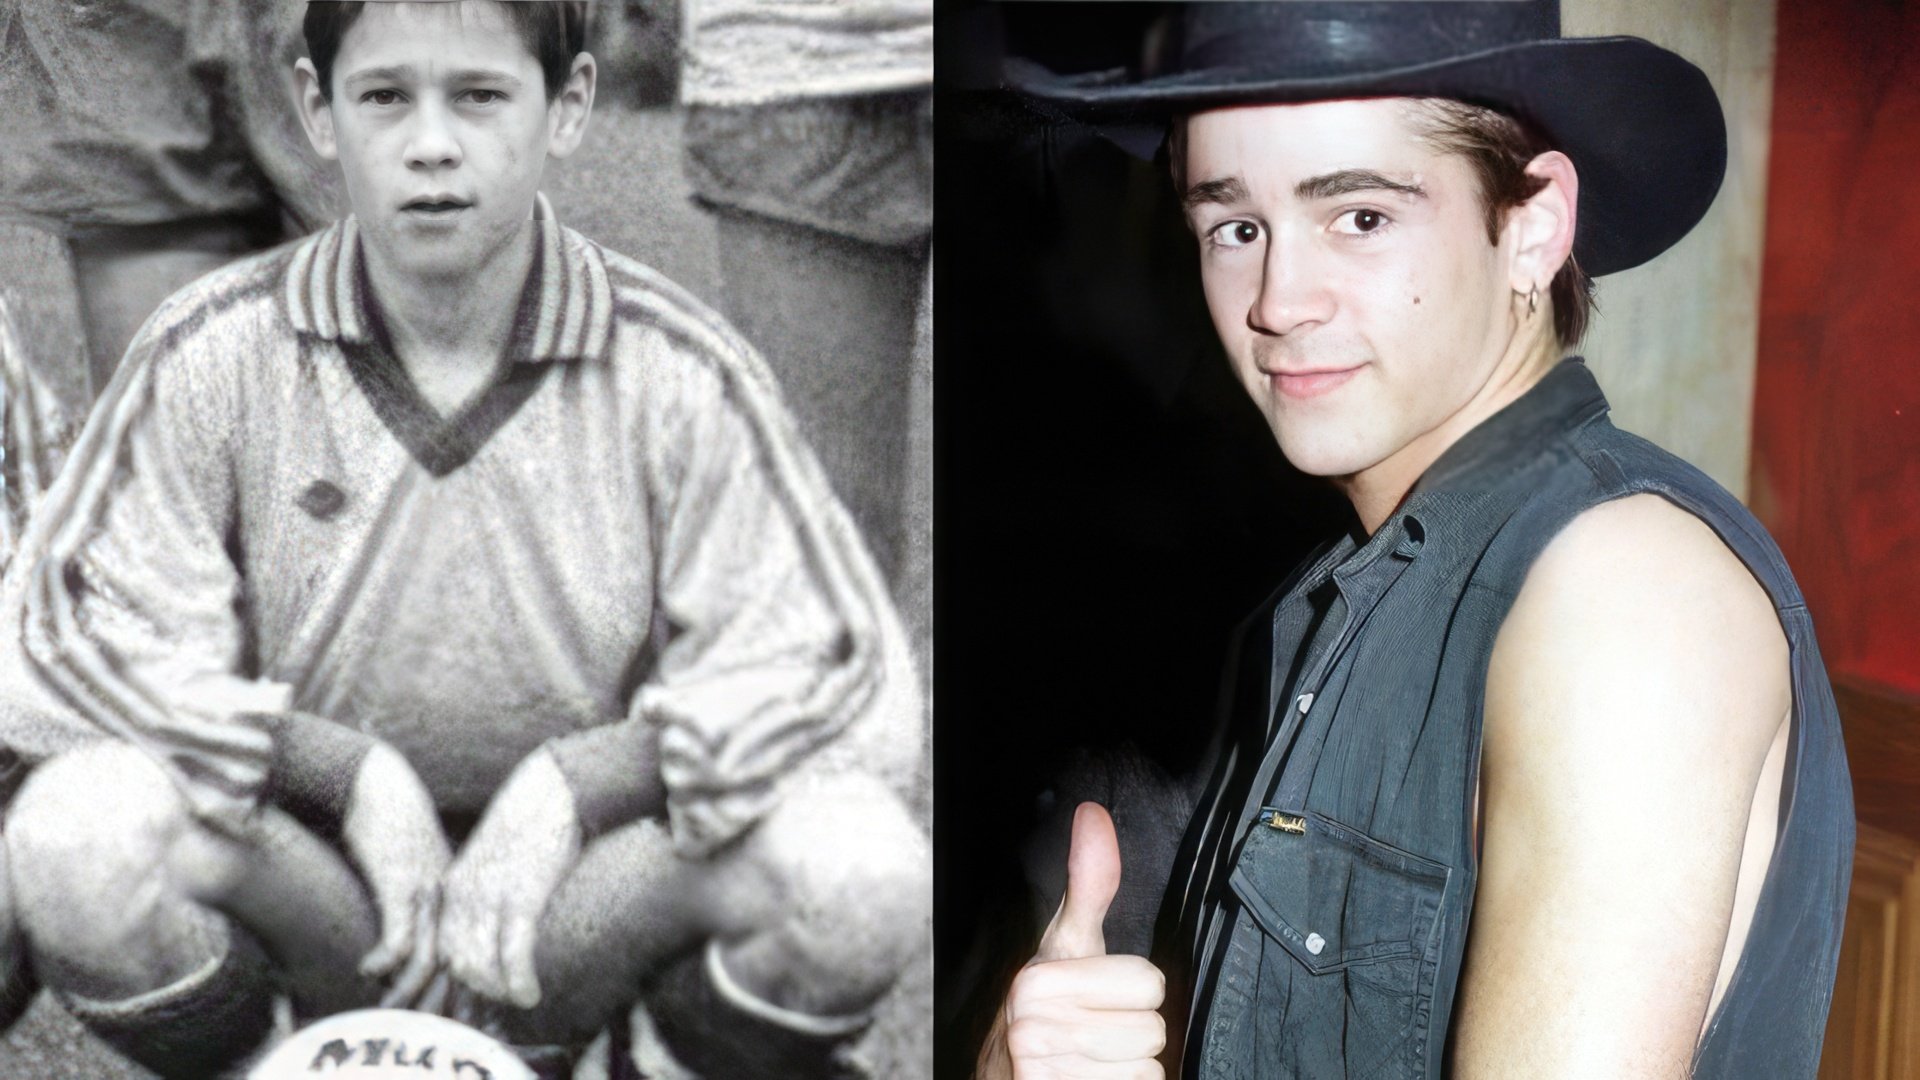 Childhood photos of Colin Farrell